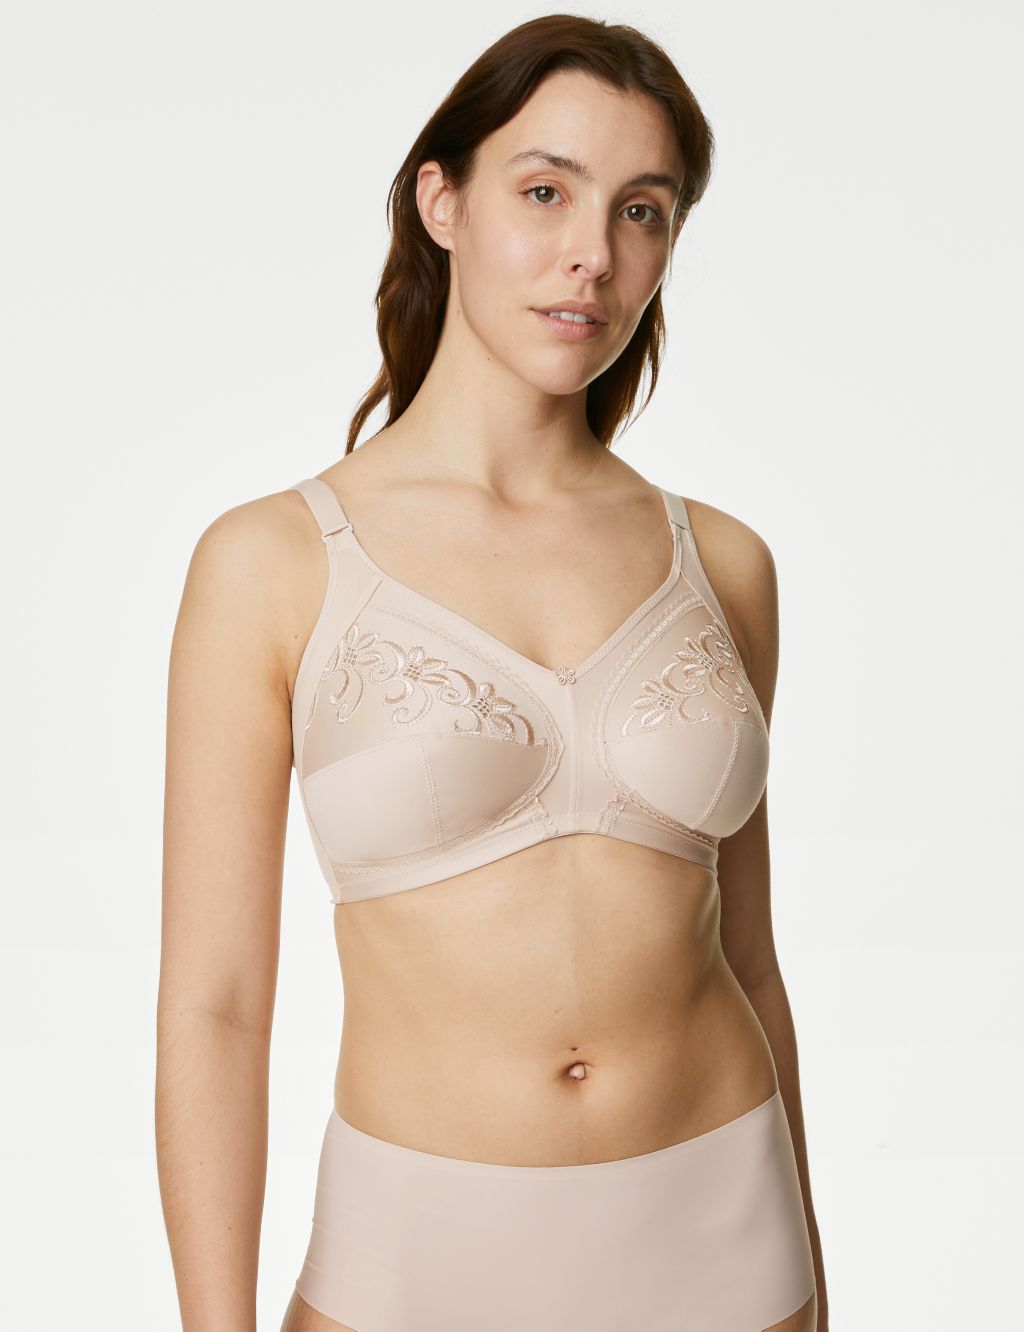 Total Support Embroidered Full Cup Bra DD-K image 3